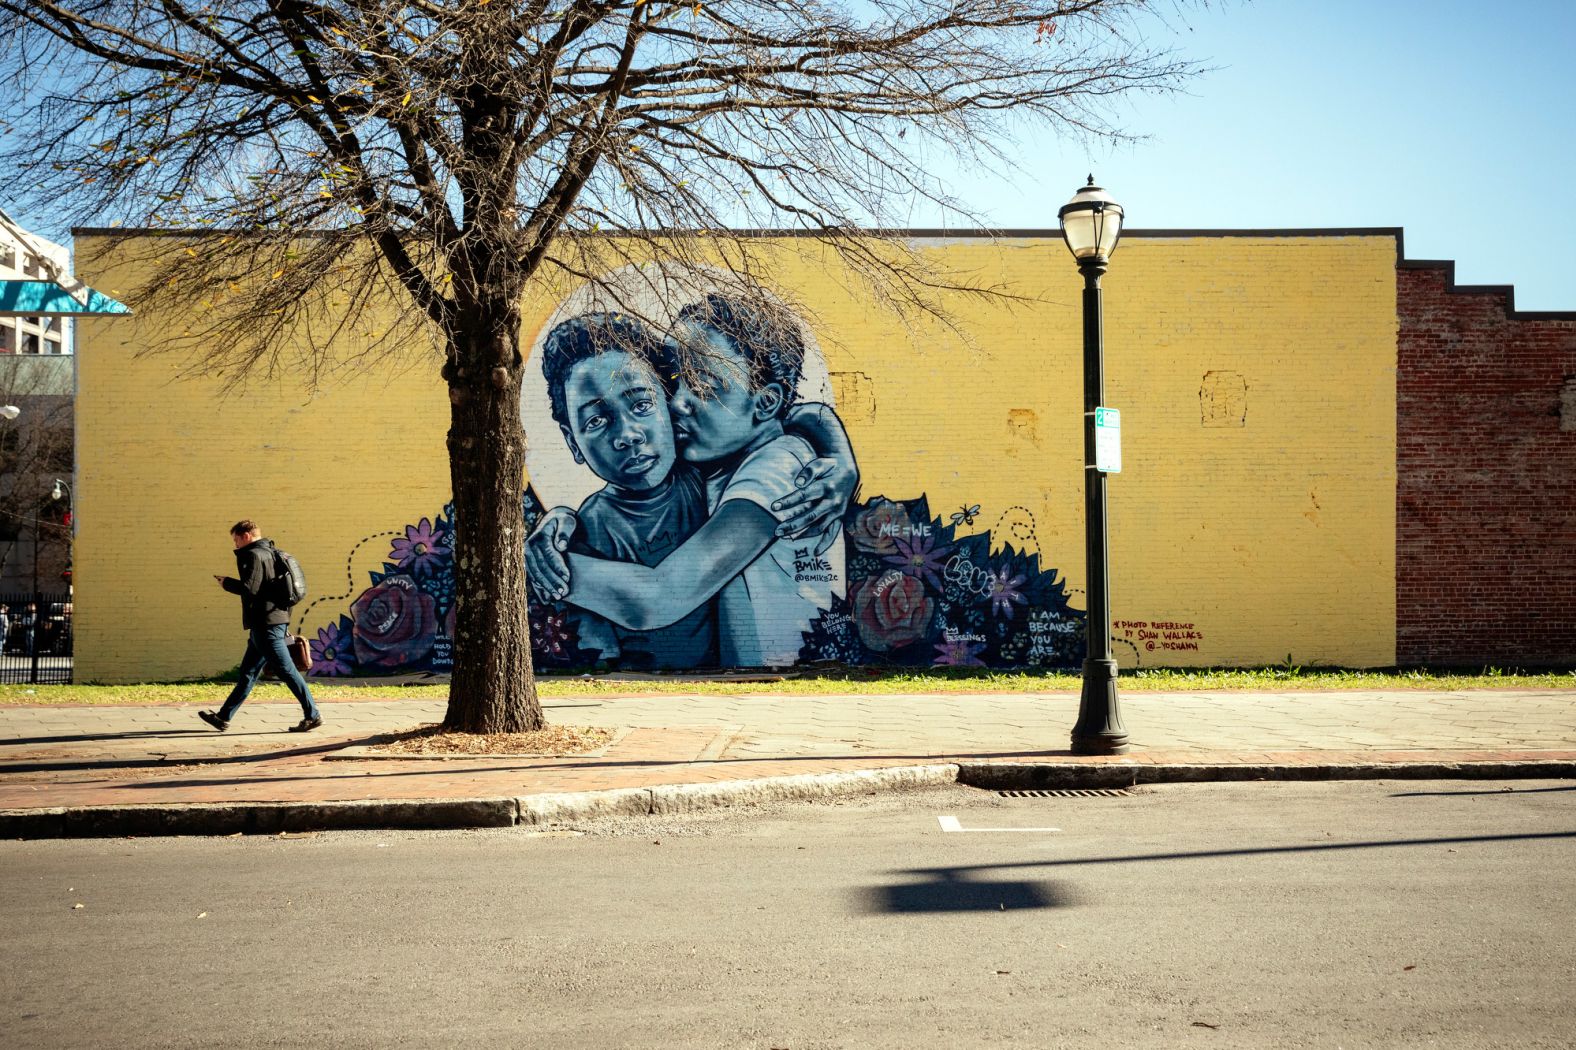 New Orleans artist Brandan "B-Mike" Odums created this mural, "<strong>Love and Protection</strong>," on Mitchell Street. With the words "Me = We" written next to a portrait of two kids hugging, Odums celebrates the power of friendship and togetherness.